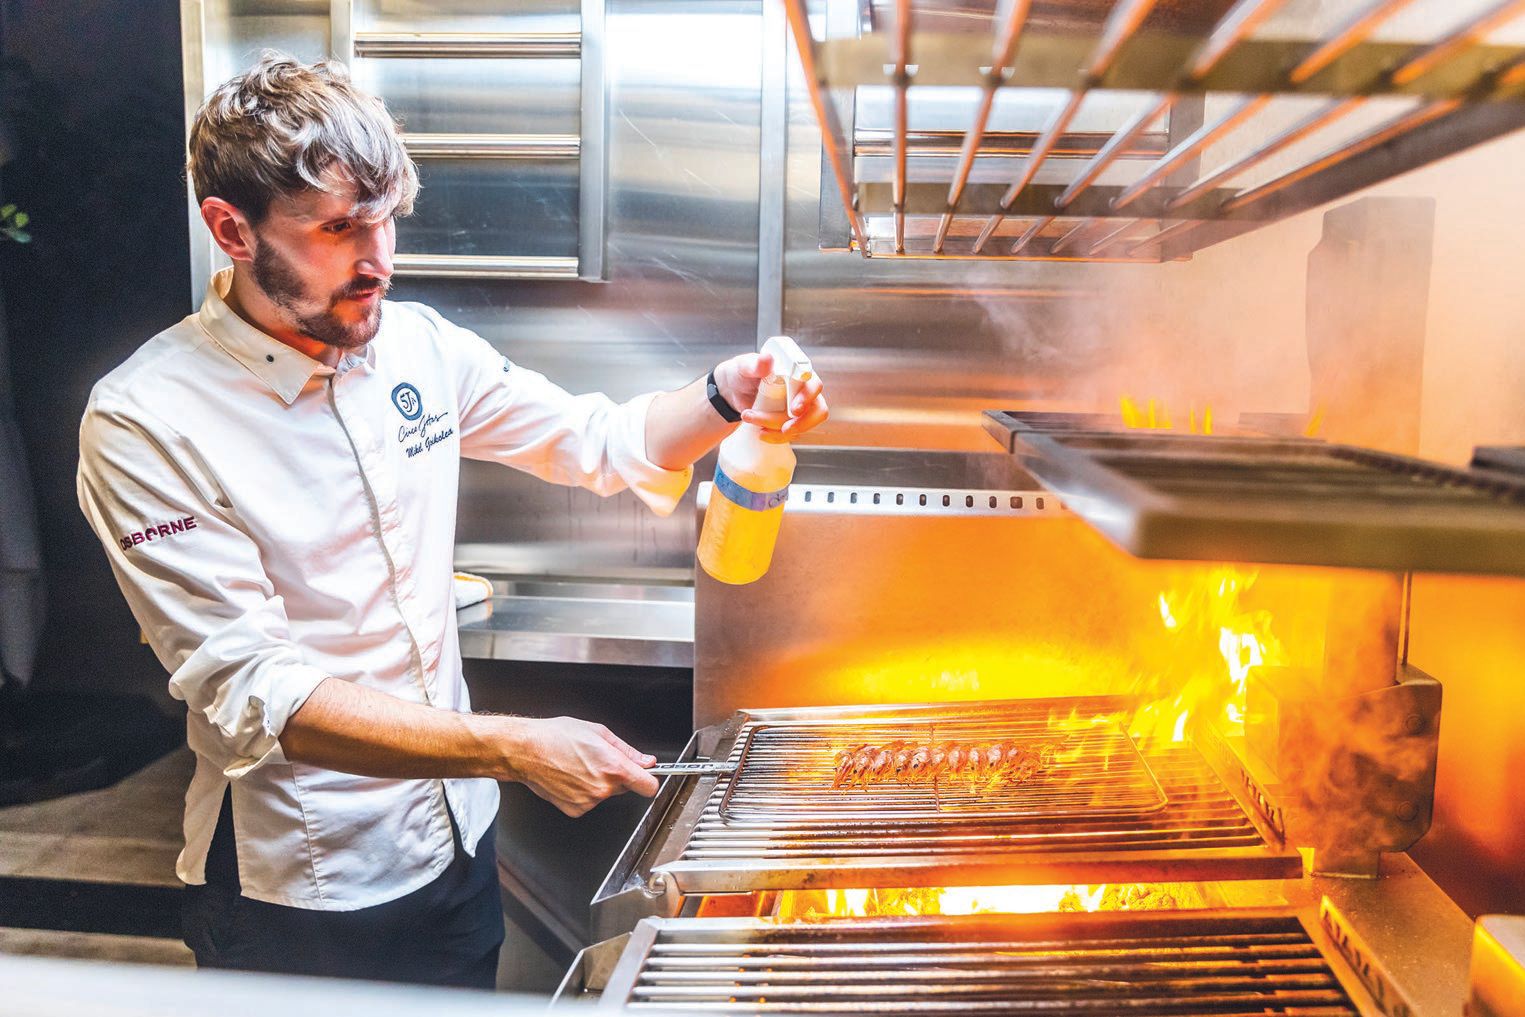 Leku now houses the first outdoor Josper grill in South Florida, prompting exquisite new grilled dishes. PHOTO BY ZACK @THEBACYARD